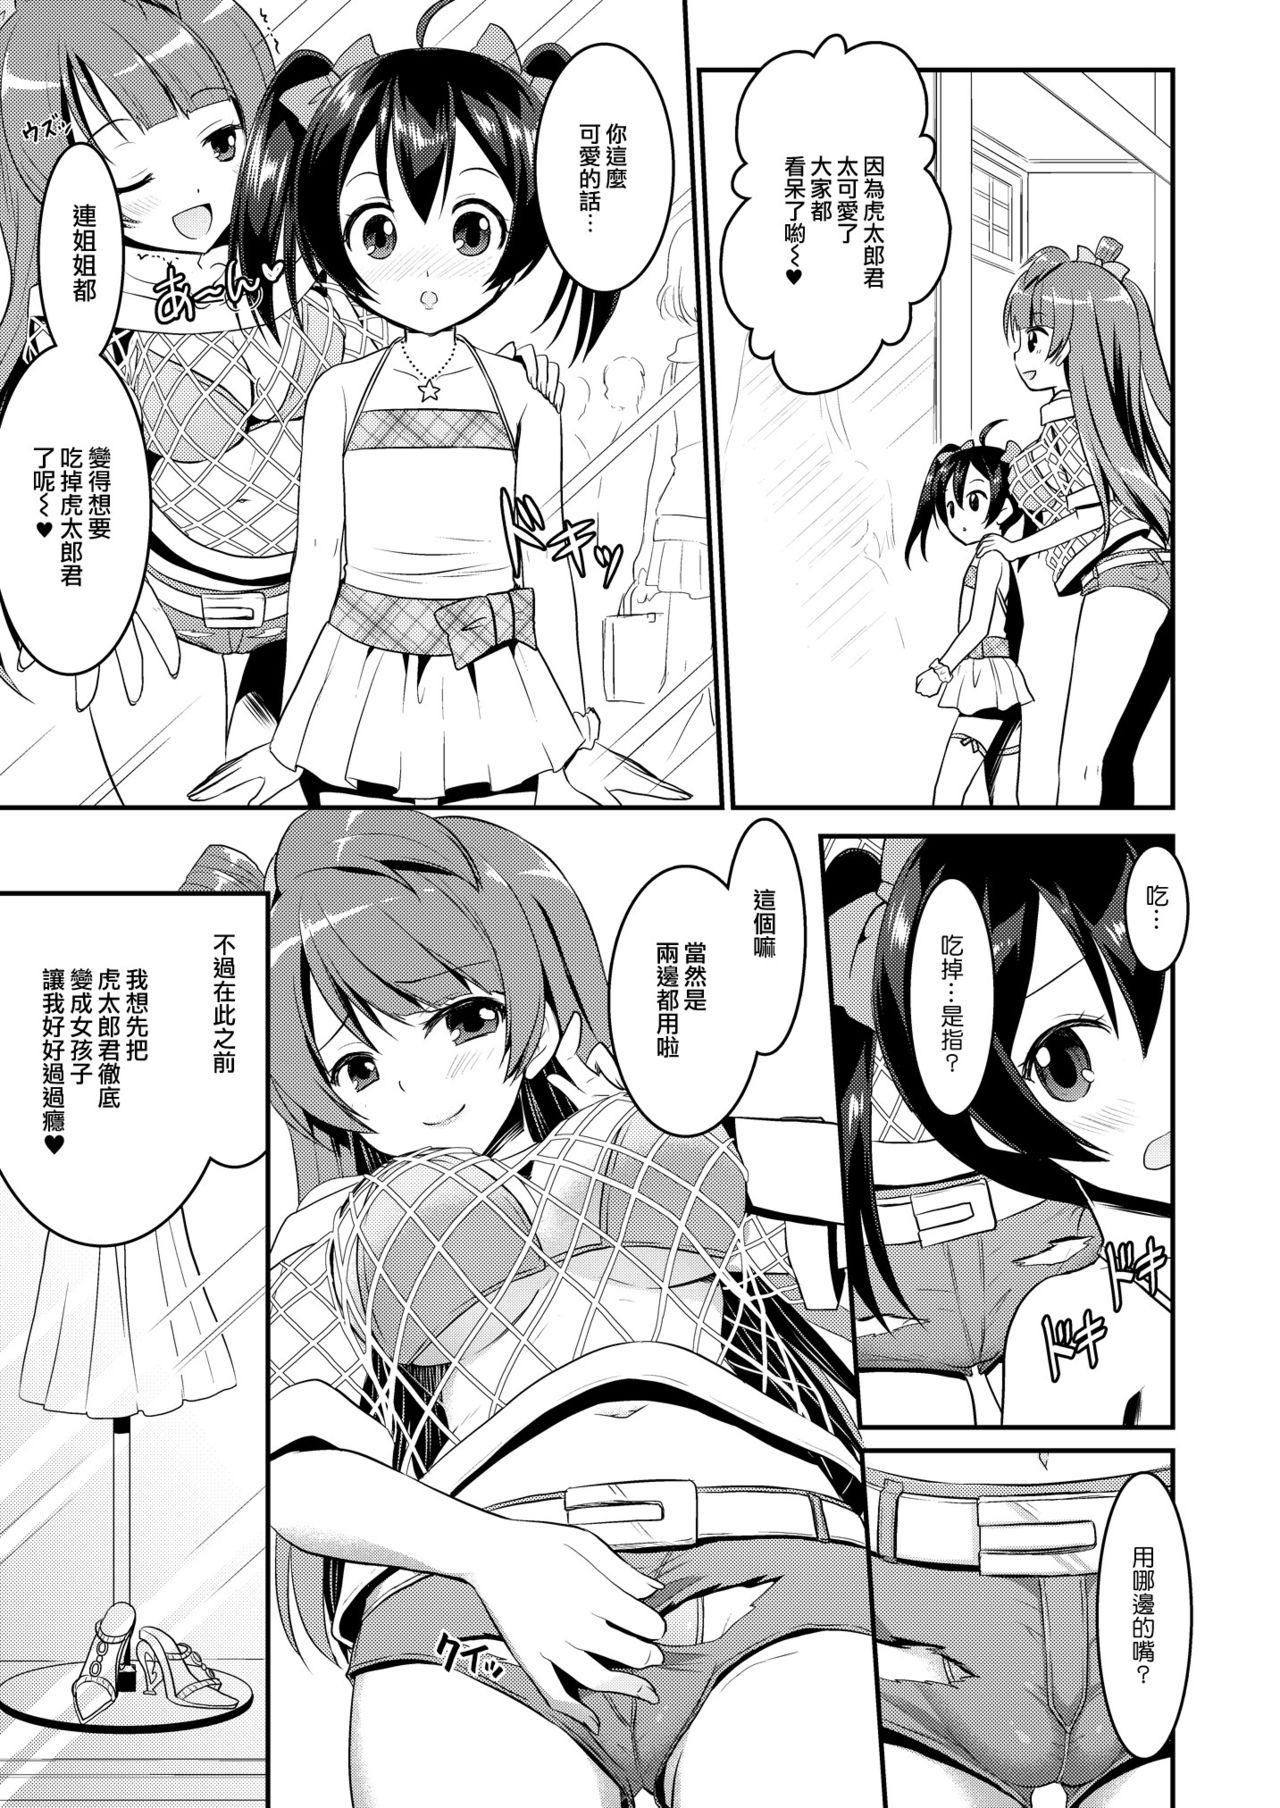 Tites Eat Meat Girl 4 - Love live Shemales - Page 9